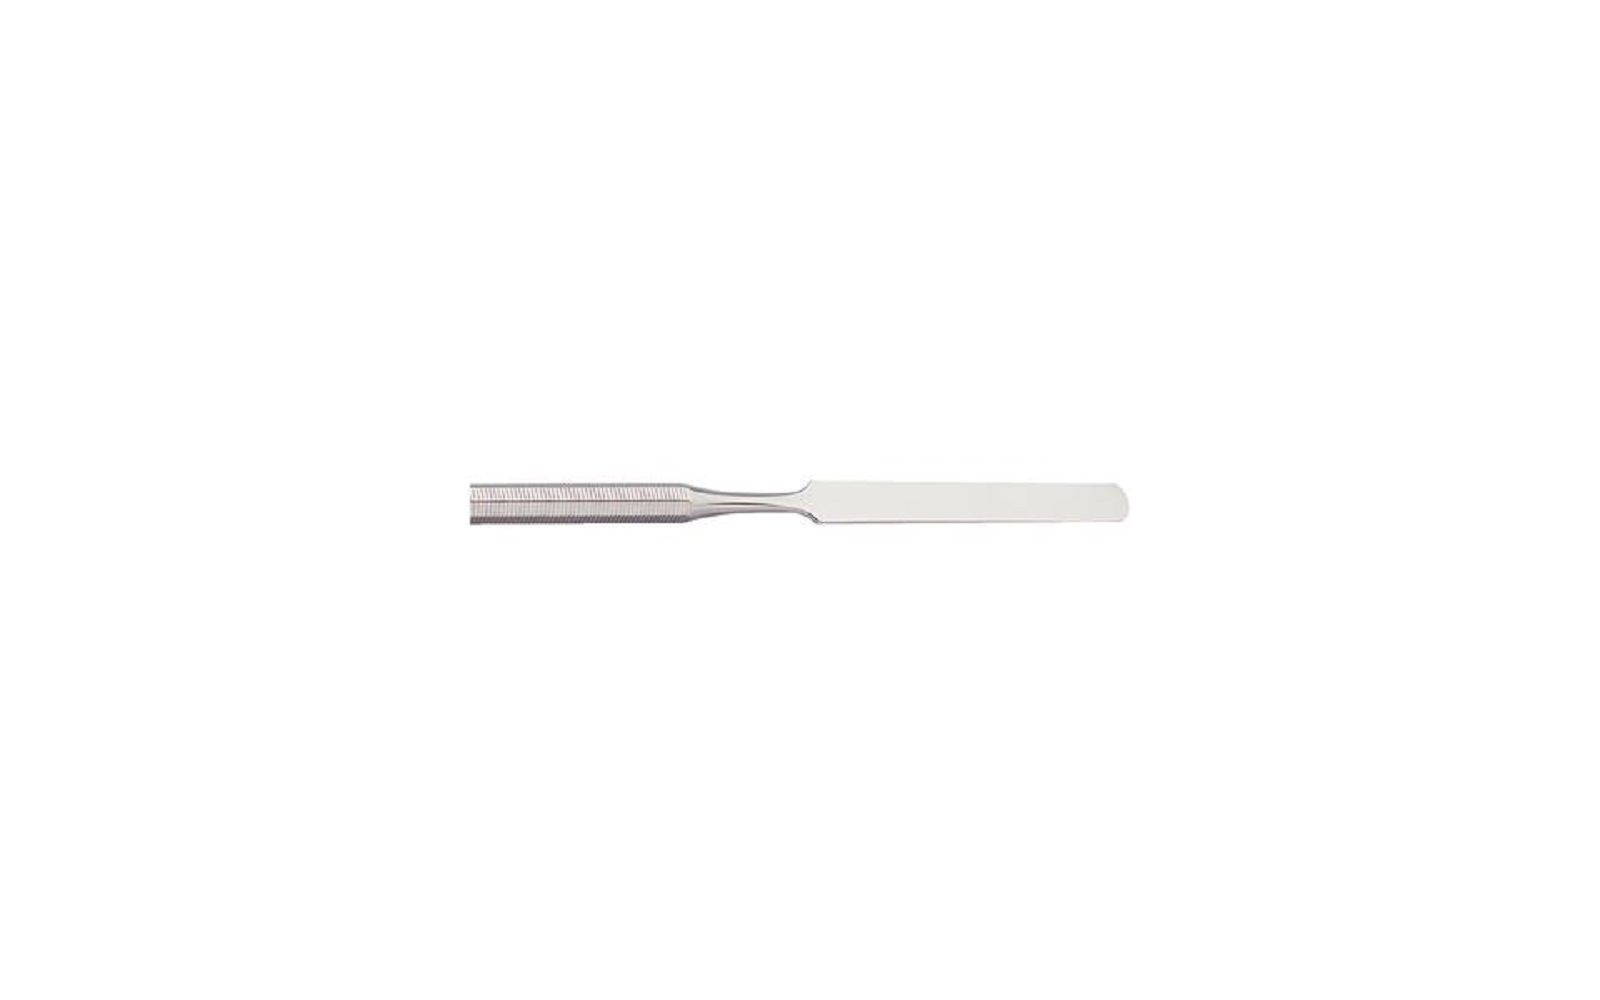 Patterson® cement spatulas – stainless steel, octagonal handle